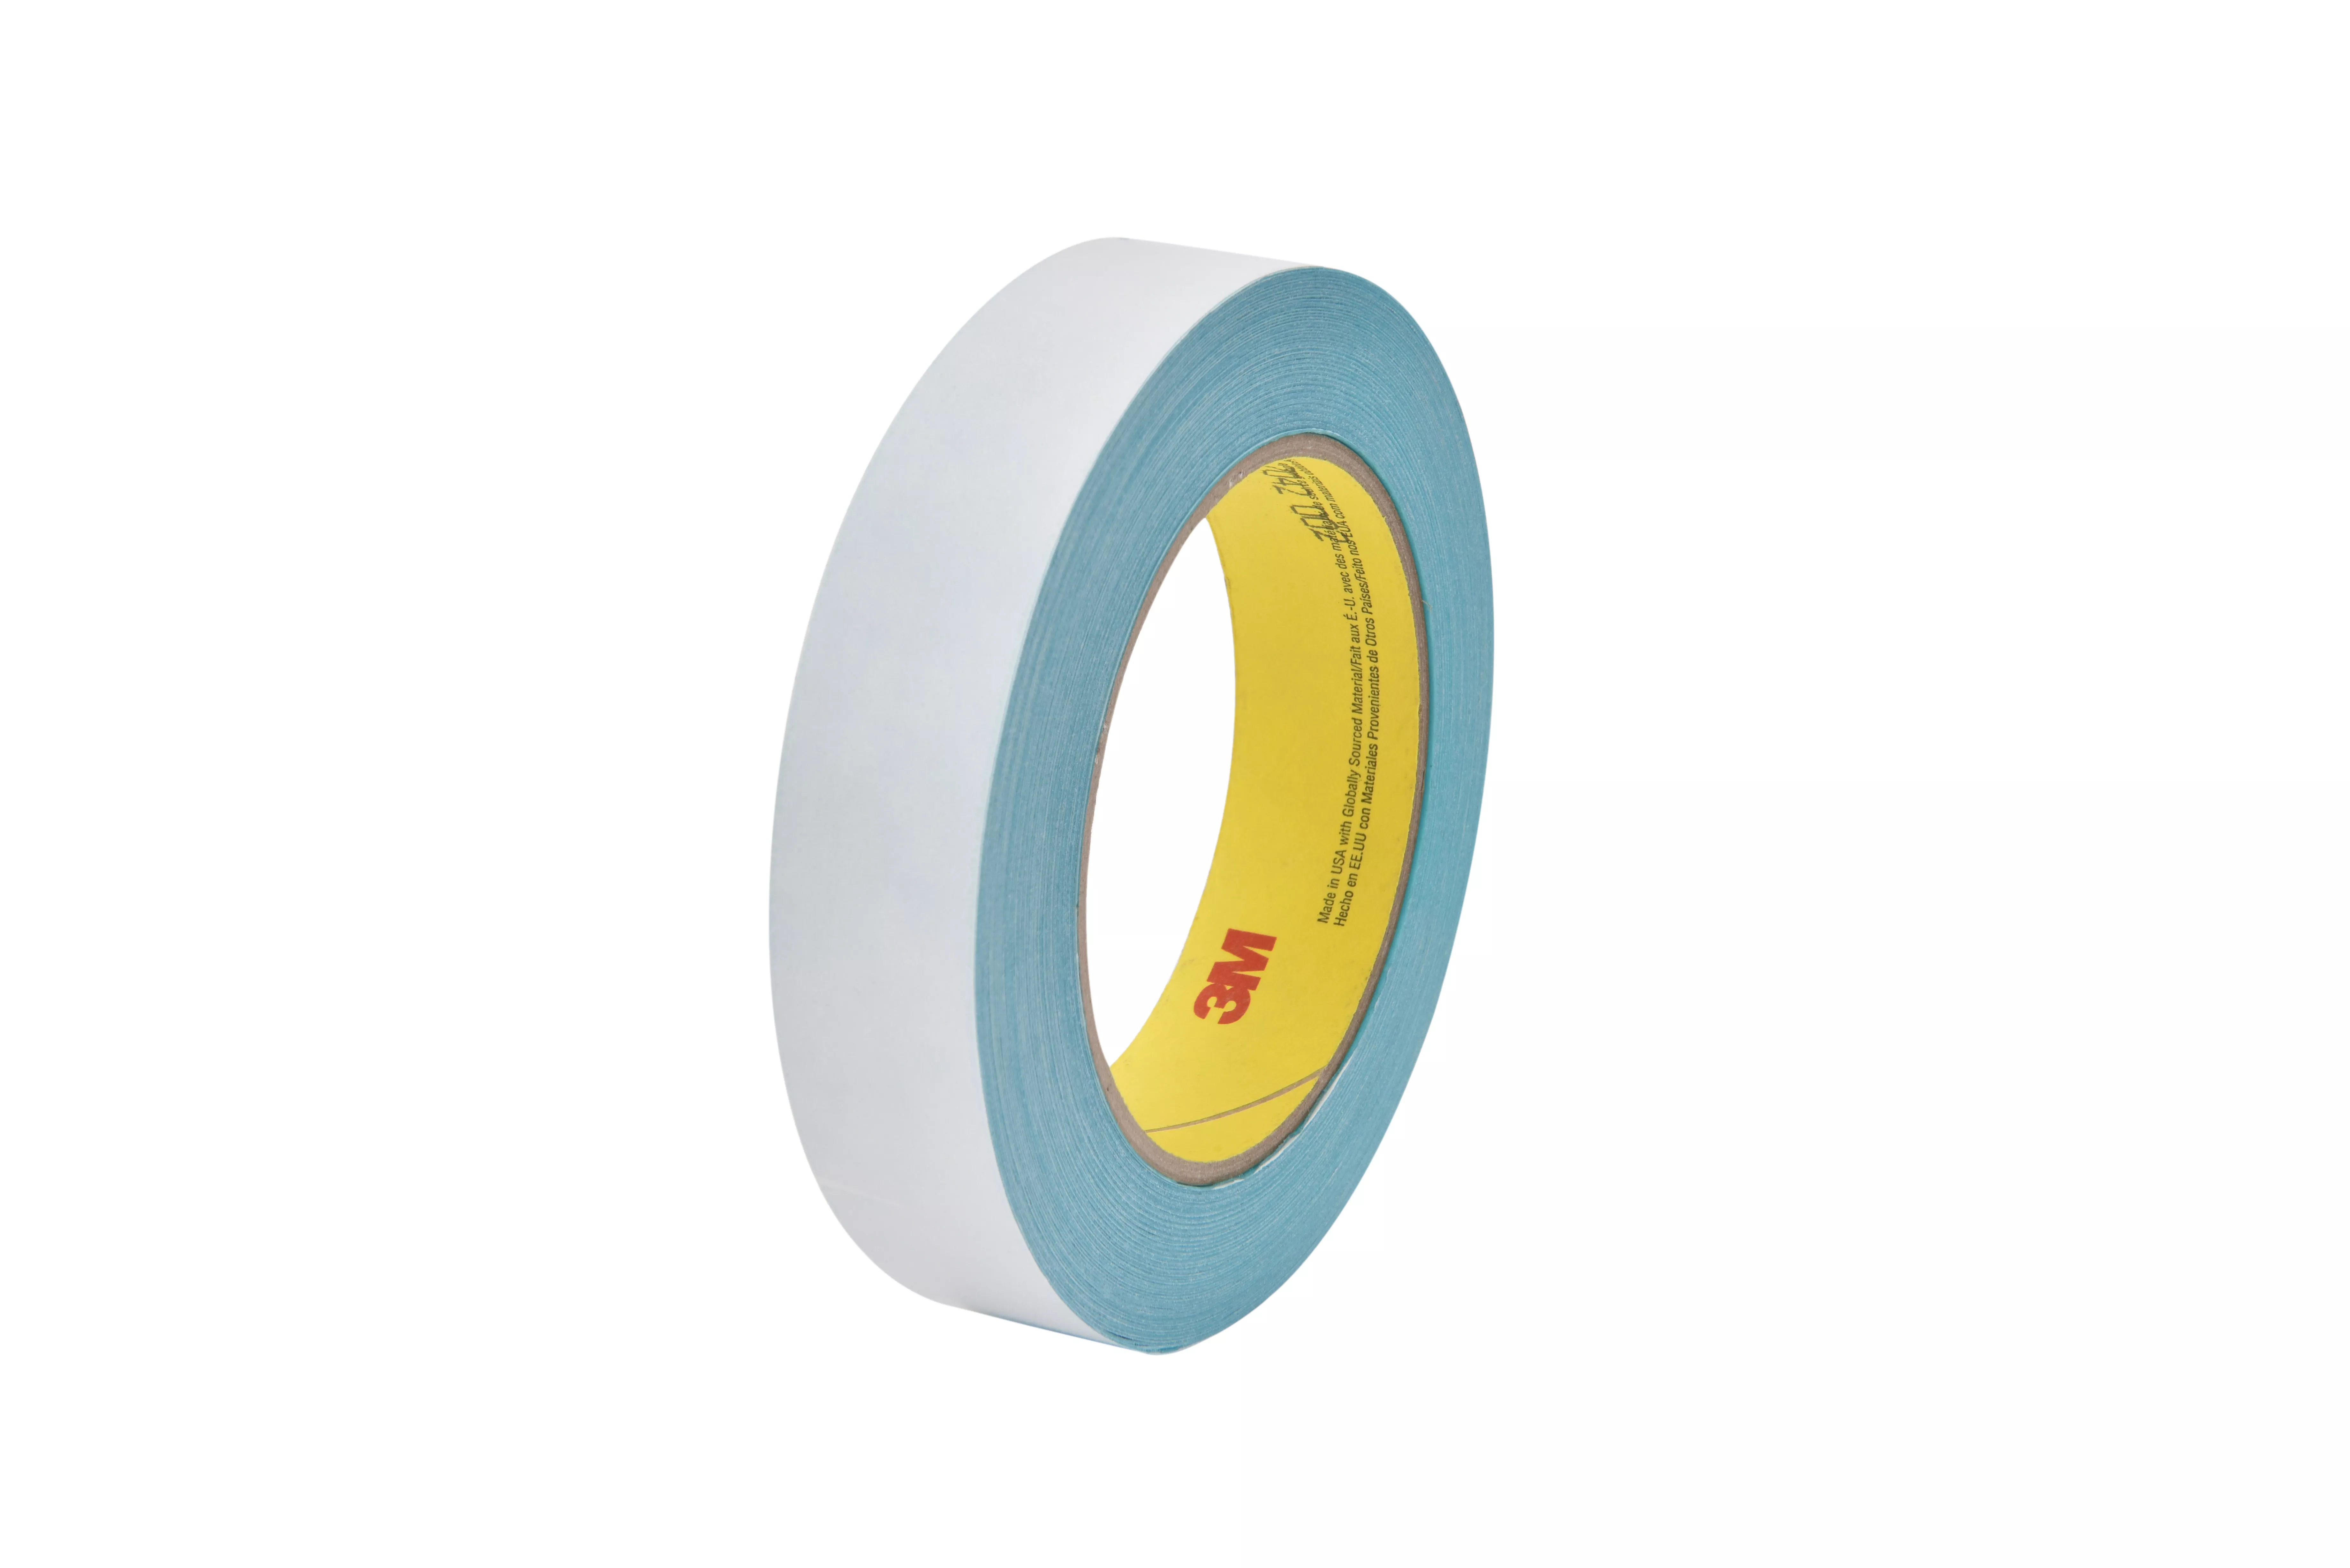 3M™ Repulpable Double Coated Flying Splice Tape 913, Blue, 18 mm x 33 m,
3 mil, 48 Roll/Case